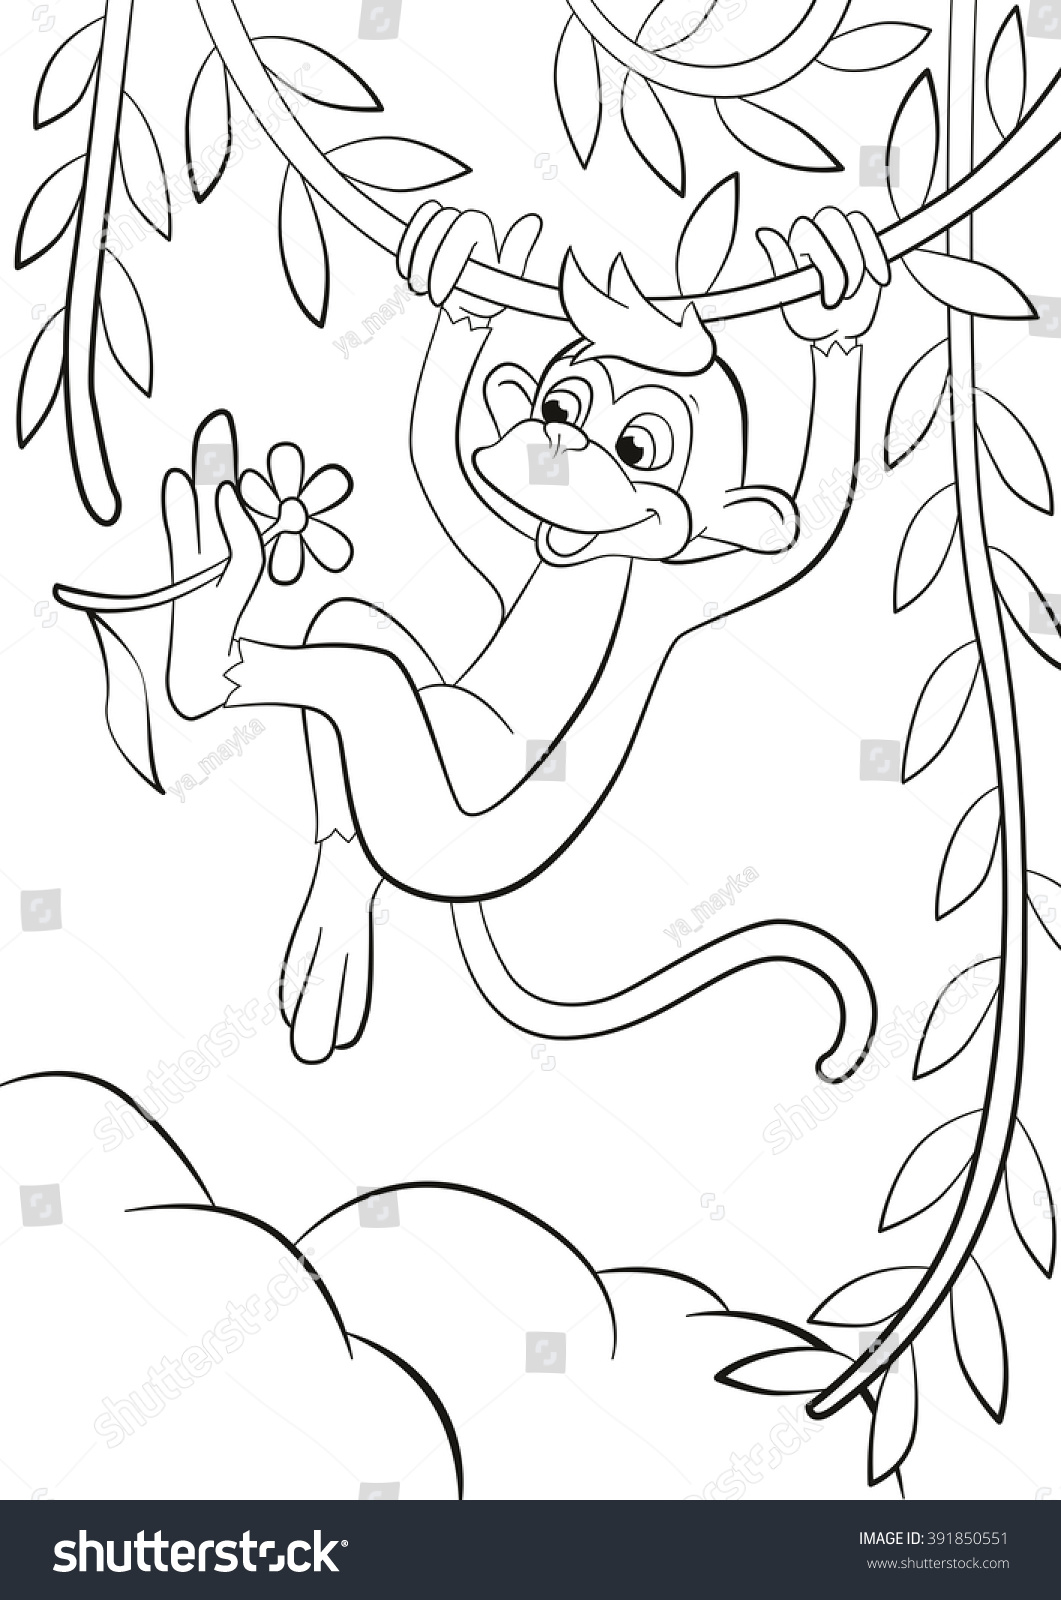 Coloring Page Cute Monkey Hunging Stock Vector 391850551 Liana Forest